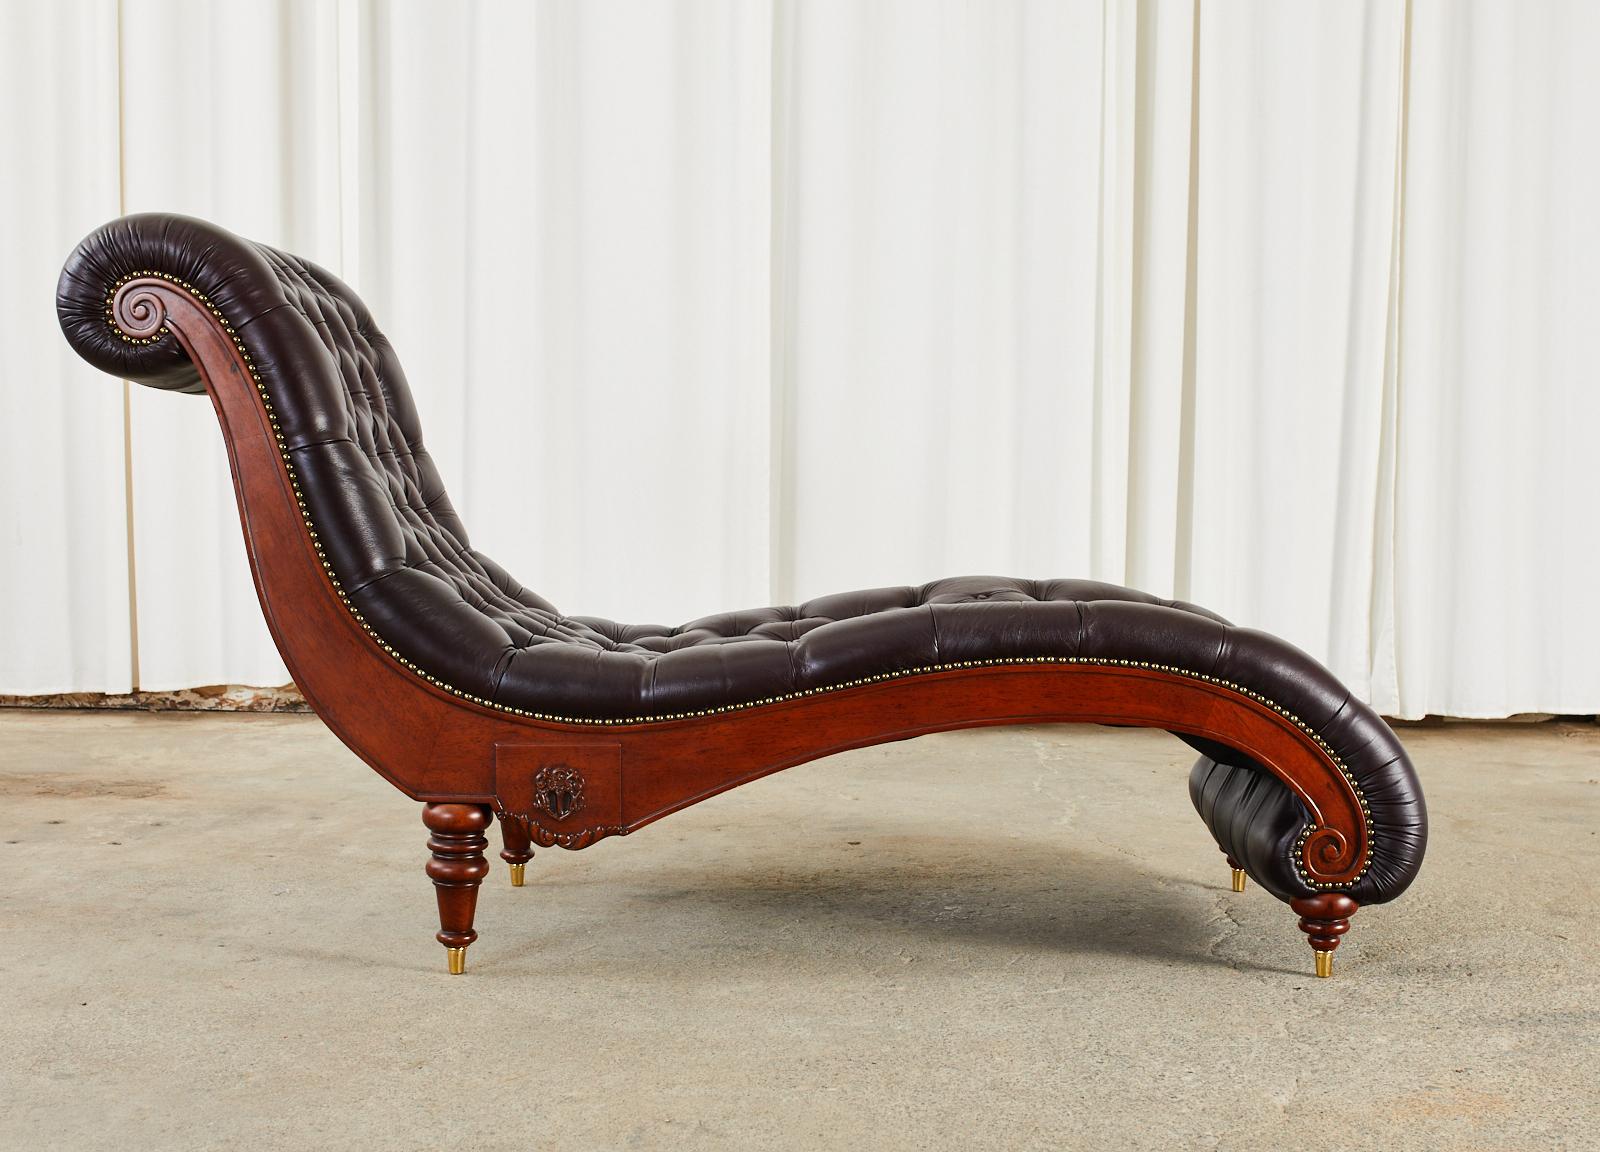 Opulent English regency style mahogany chaise lounge or chaise longue featuring a chesterfield style button tufted seating area with brass tack borders. The thick padded cordovan leather is amazingly comfortable with a body contouring design. The